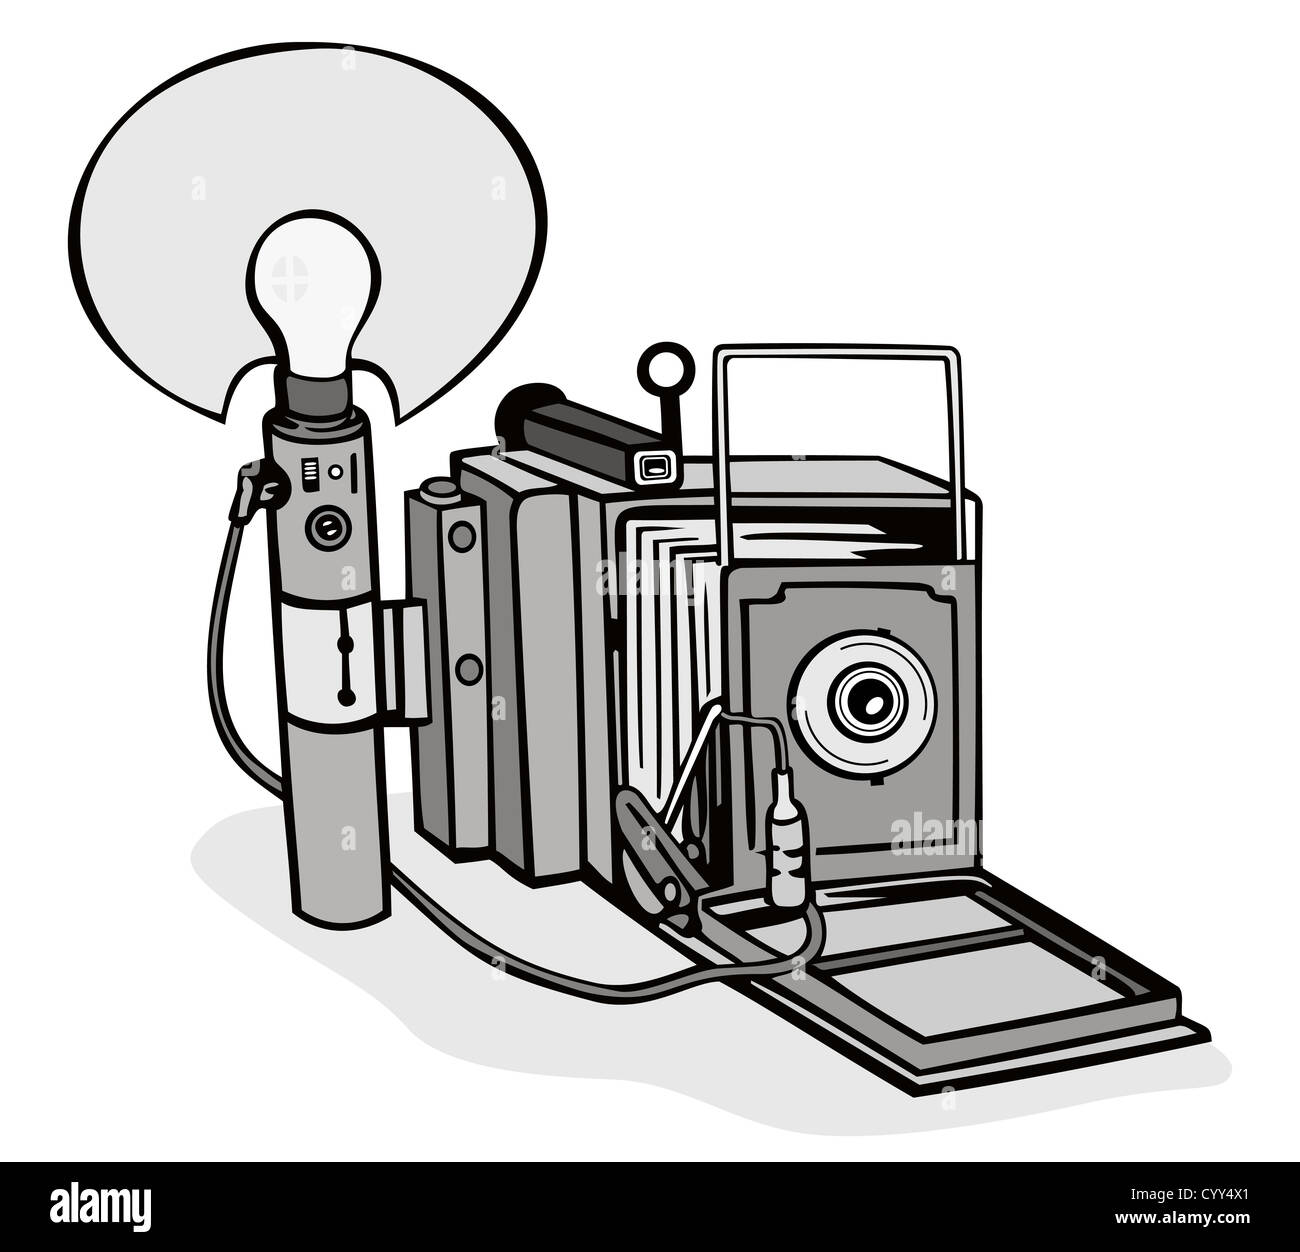 Illustration of a vintage camera done in retro style. Stock Photo